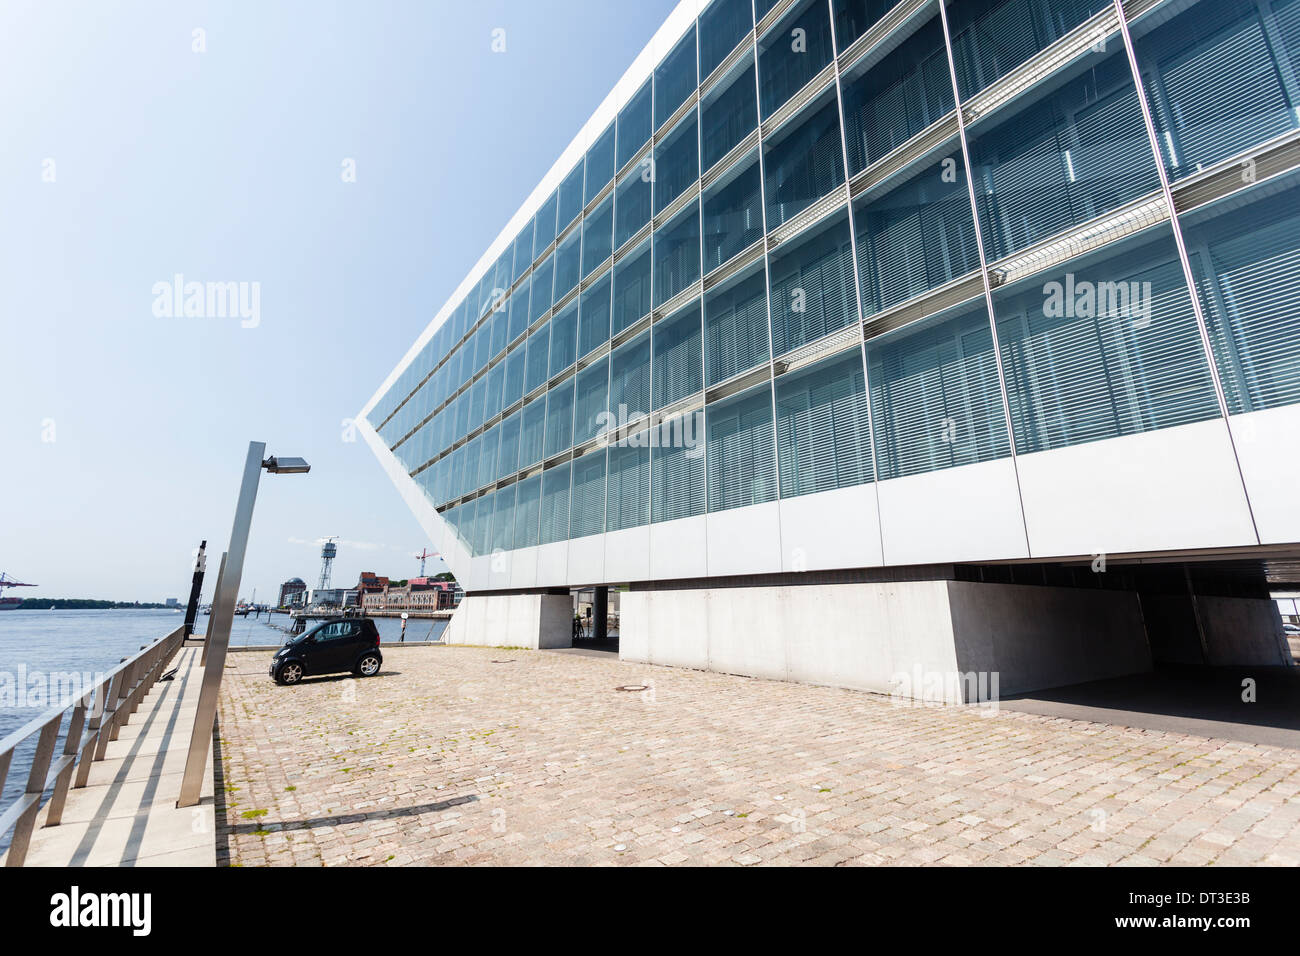 Side view of the beautiful Dockland building in Hamburg, Germany at the Elbe River. Stock Photo